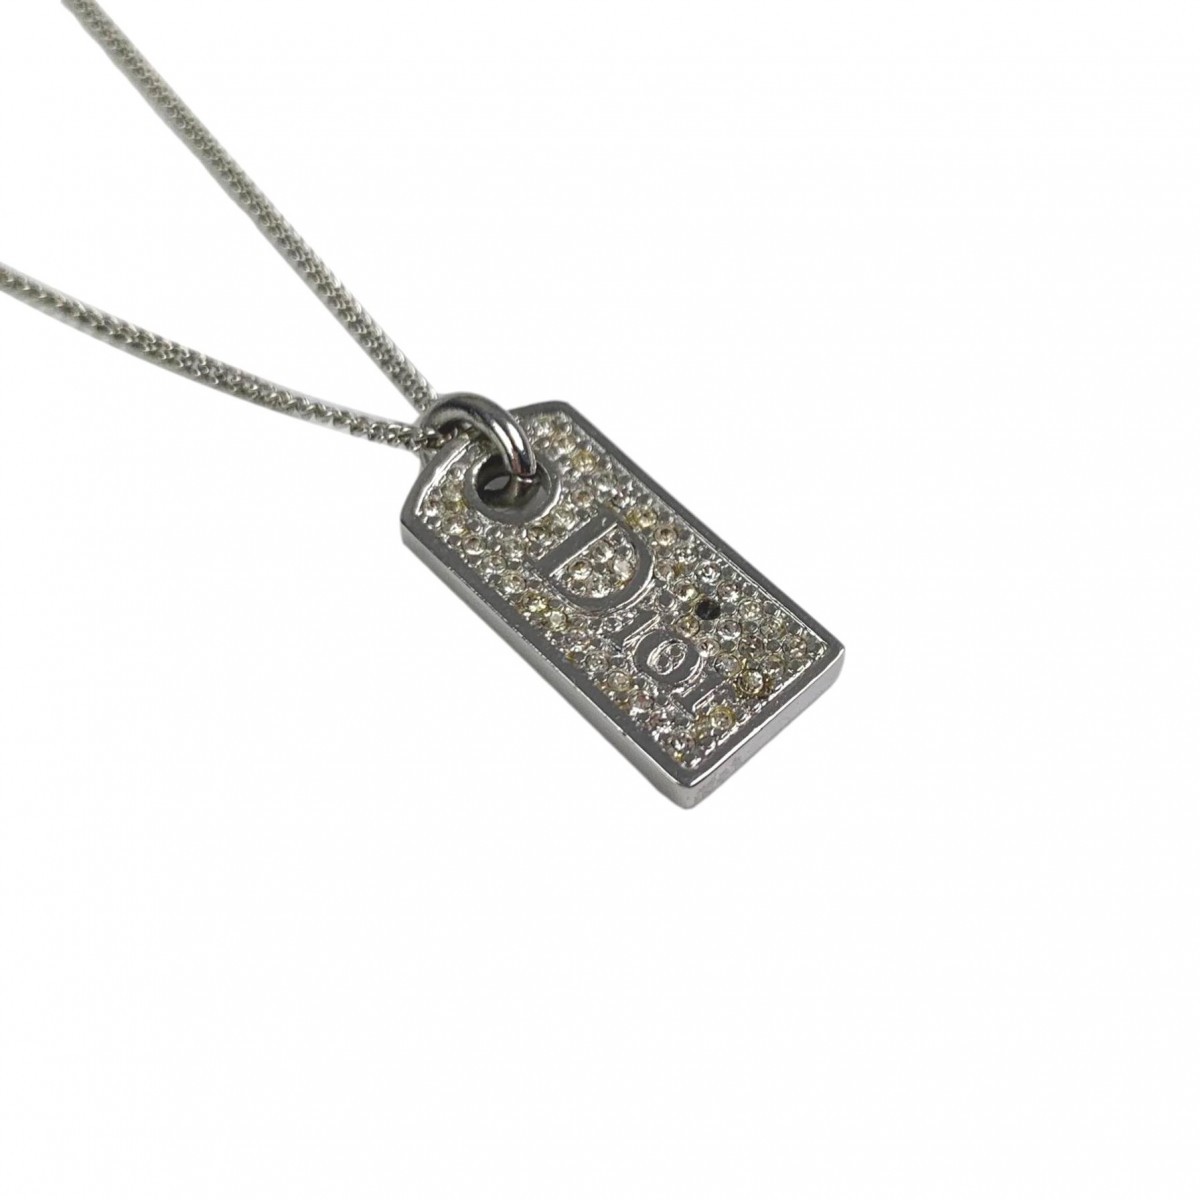 Silver Spellout Dog Tag Necklace - 2